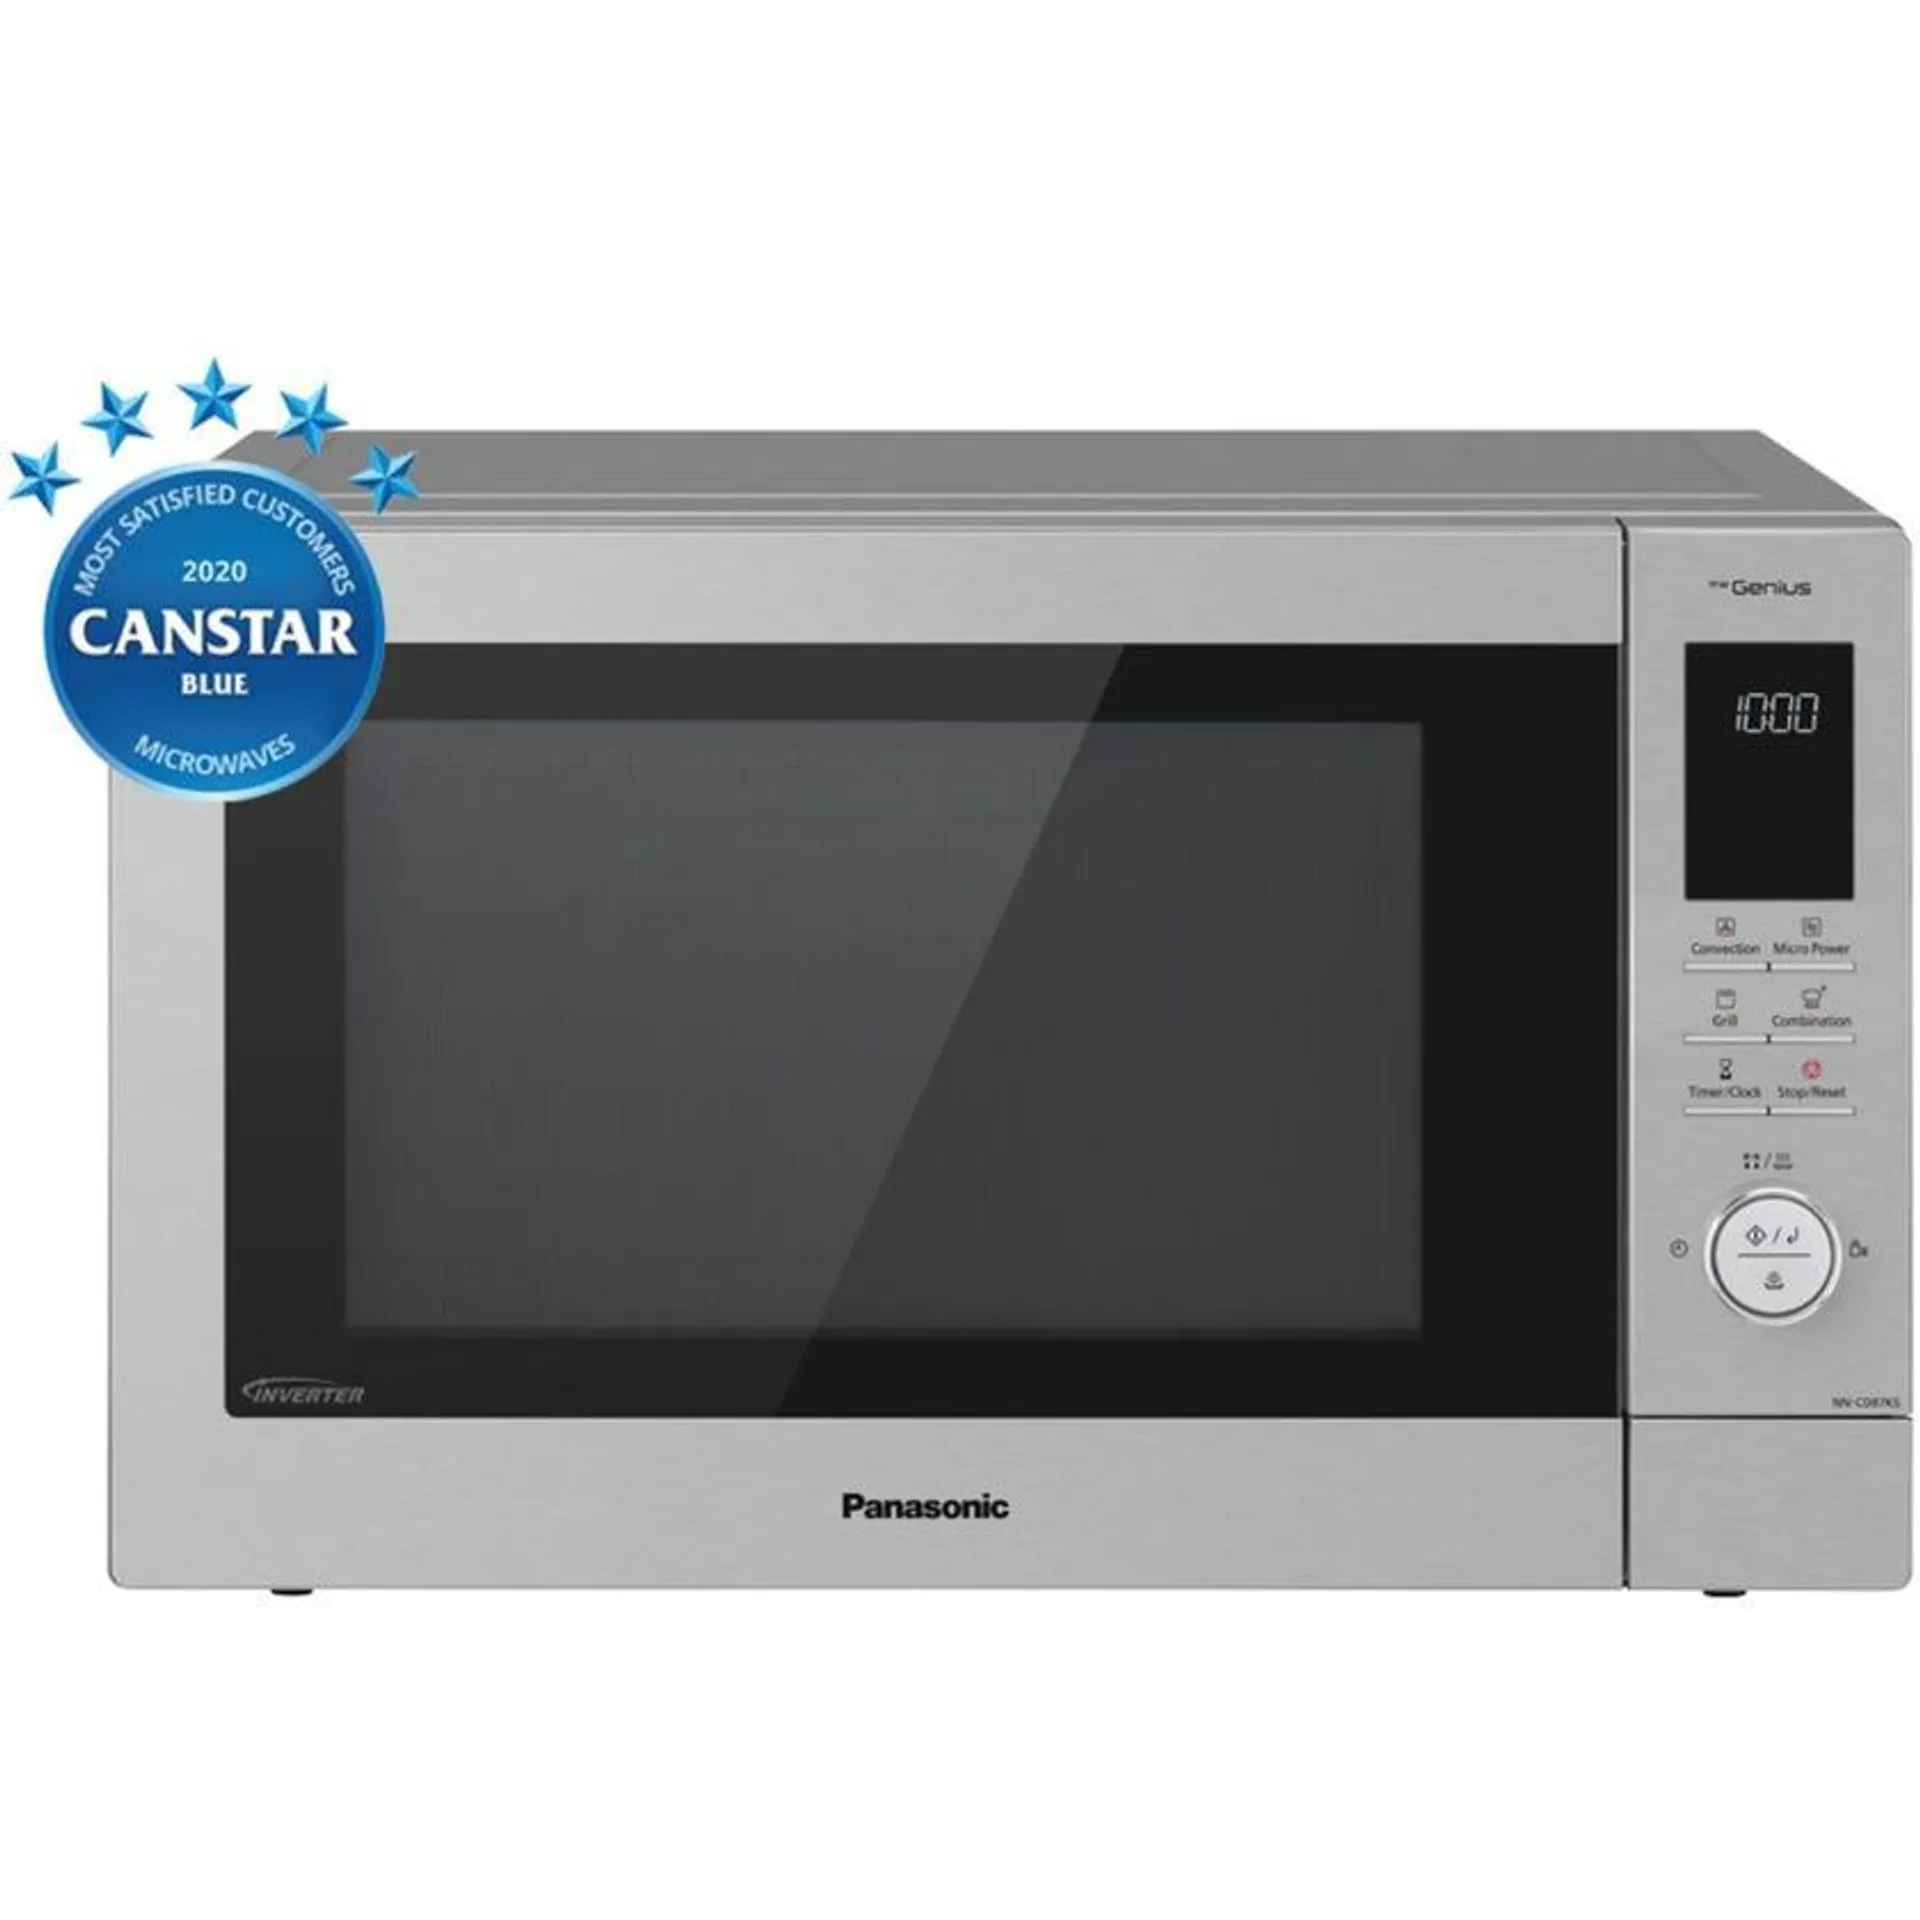 Panasonic NNCD87KSQPQ 34L Stainless Steel 1000W Combination Microwave